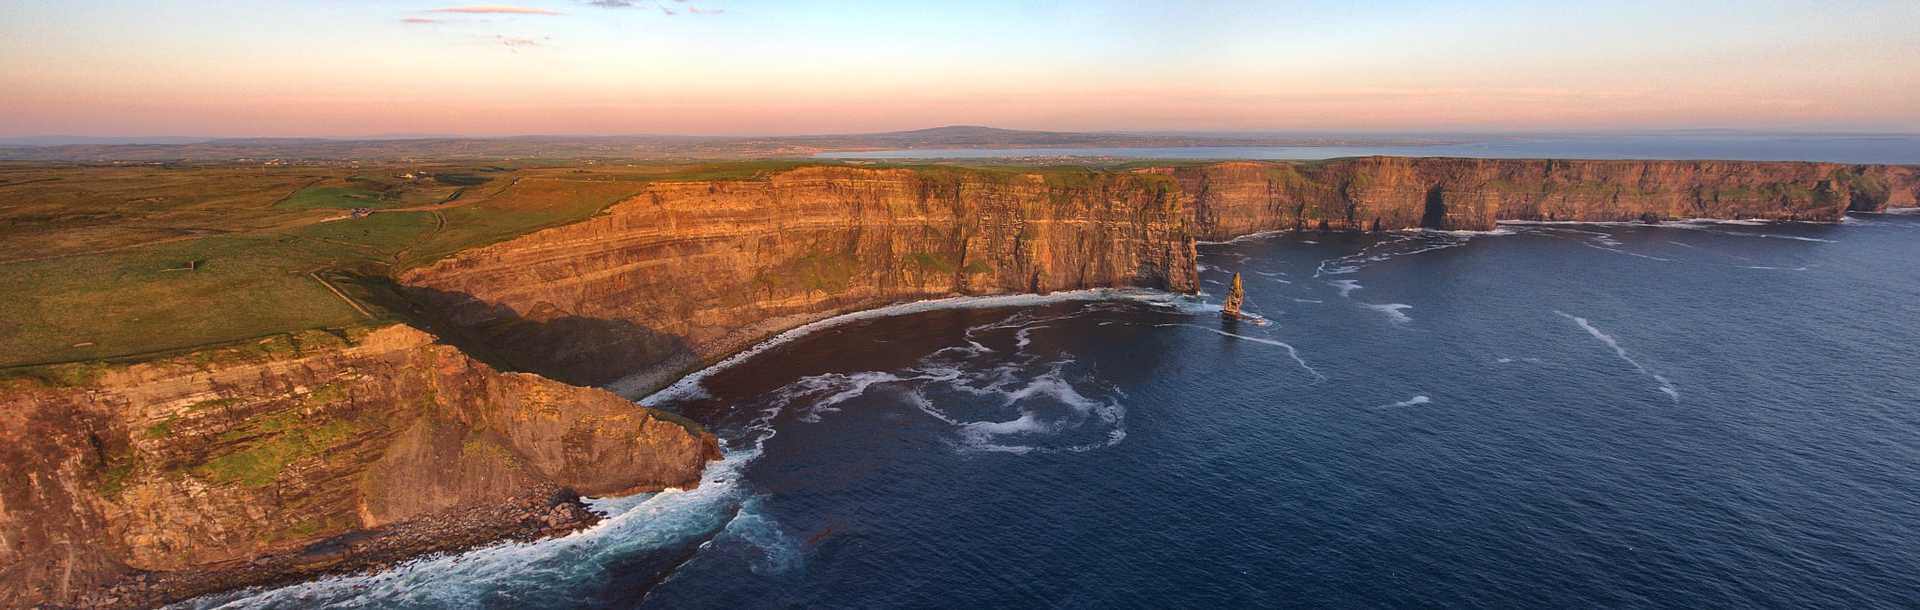 The Cliffs of Moher in County Clare, Ireland.